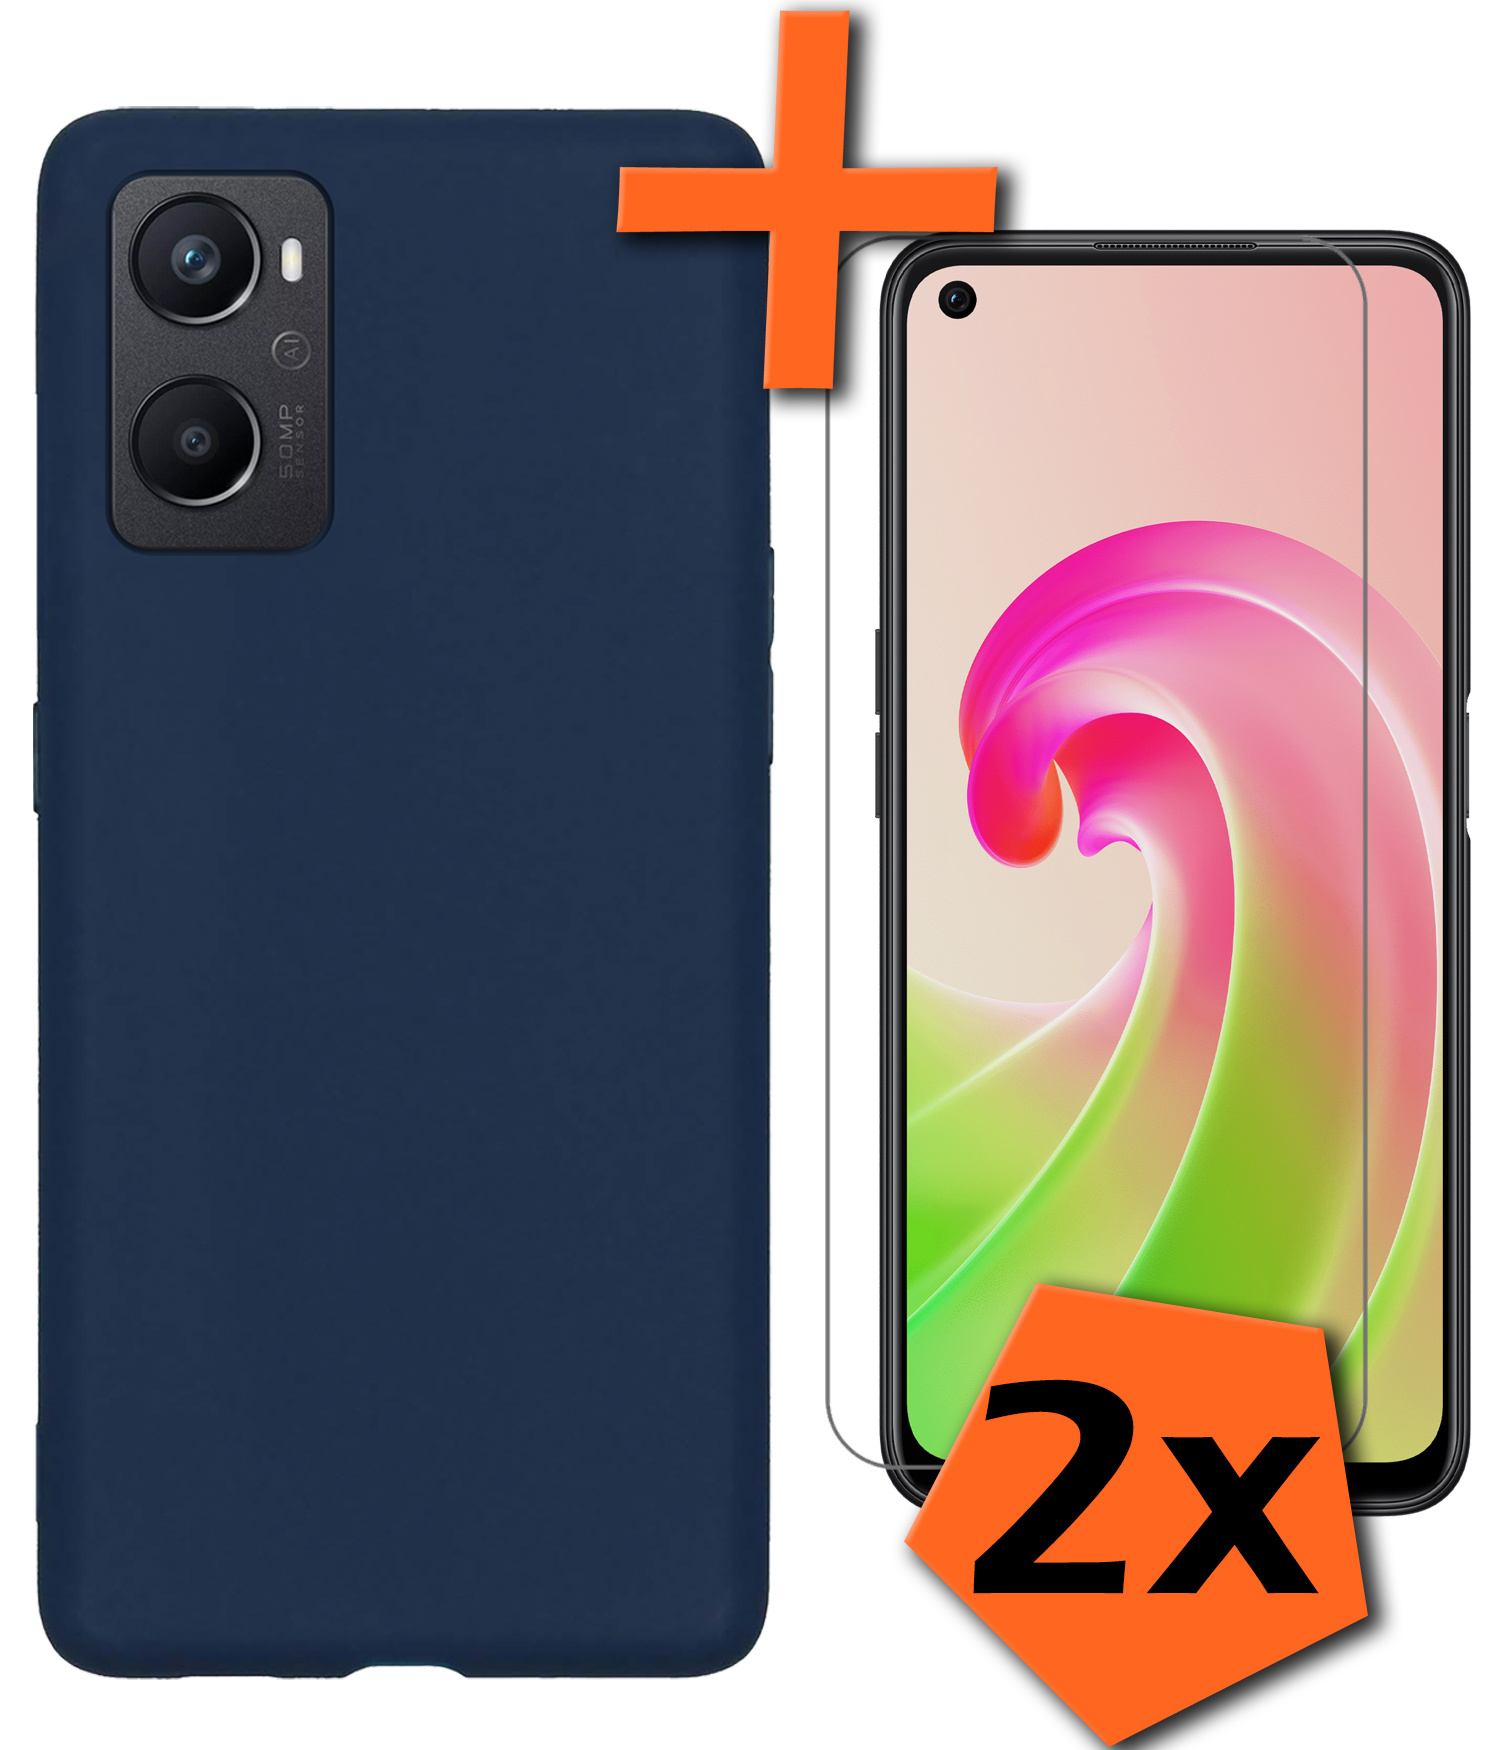 Nomfy OPPO A76 Hoesje Met 2x Screenprotector - OPPO A76 Case Donker Blauw Siliconen - OPPO A76 Hoes Met 2x Screenprotector